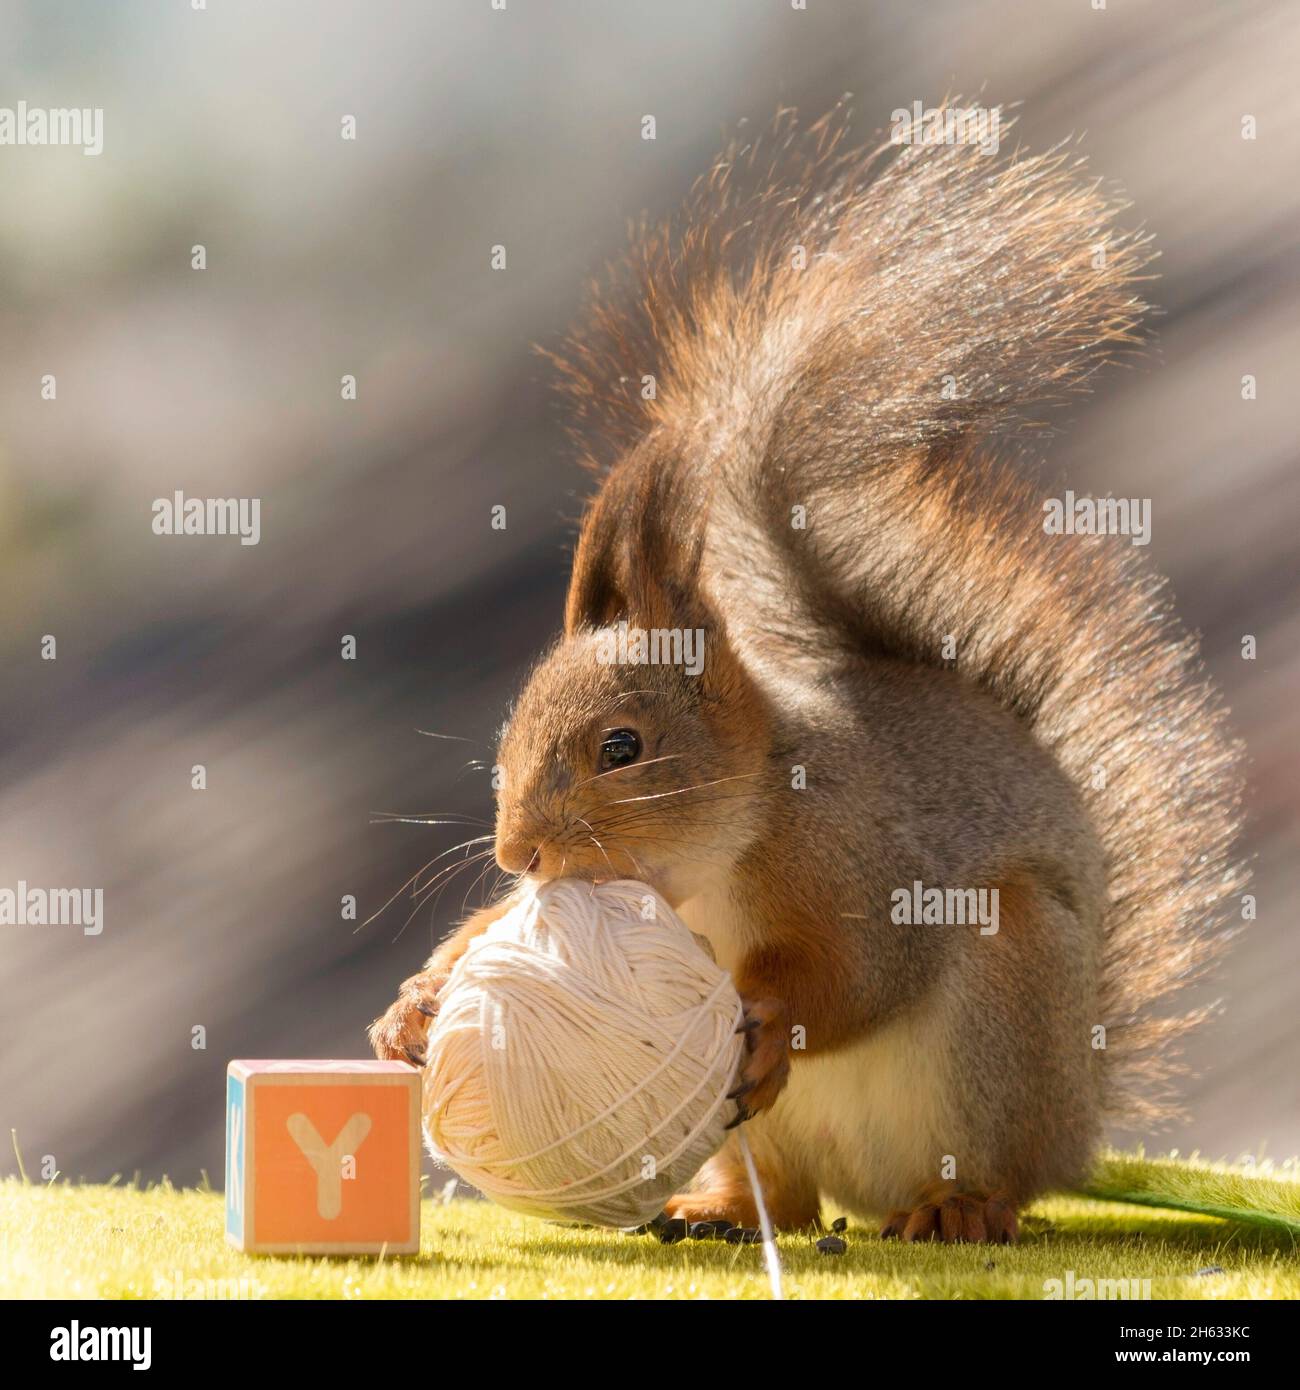 close up of red squirrel holding a ball of yarn with capital beneath Stock Photo